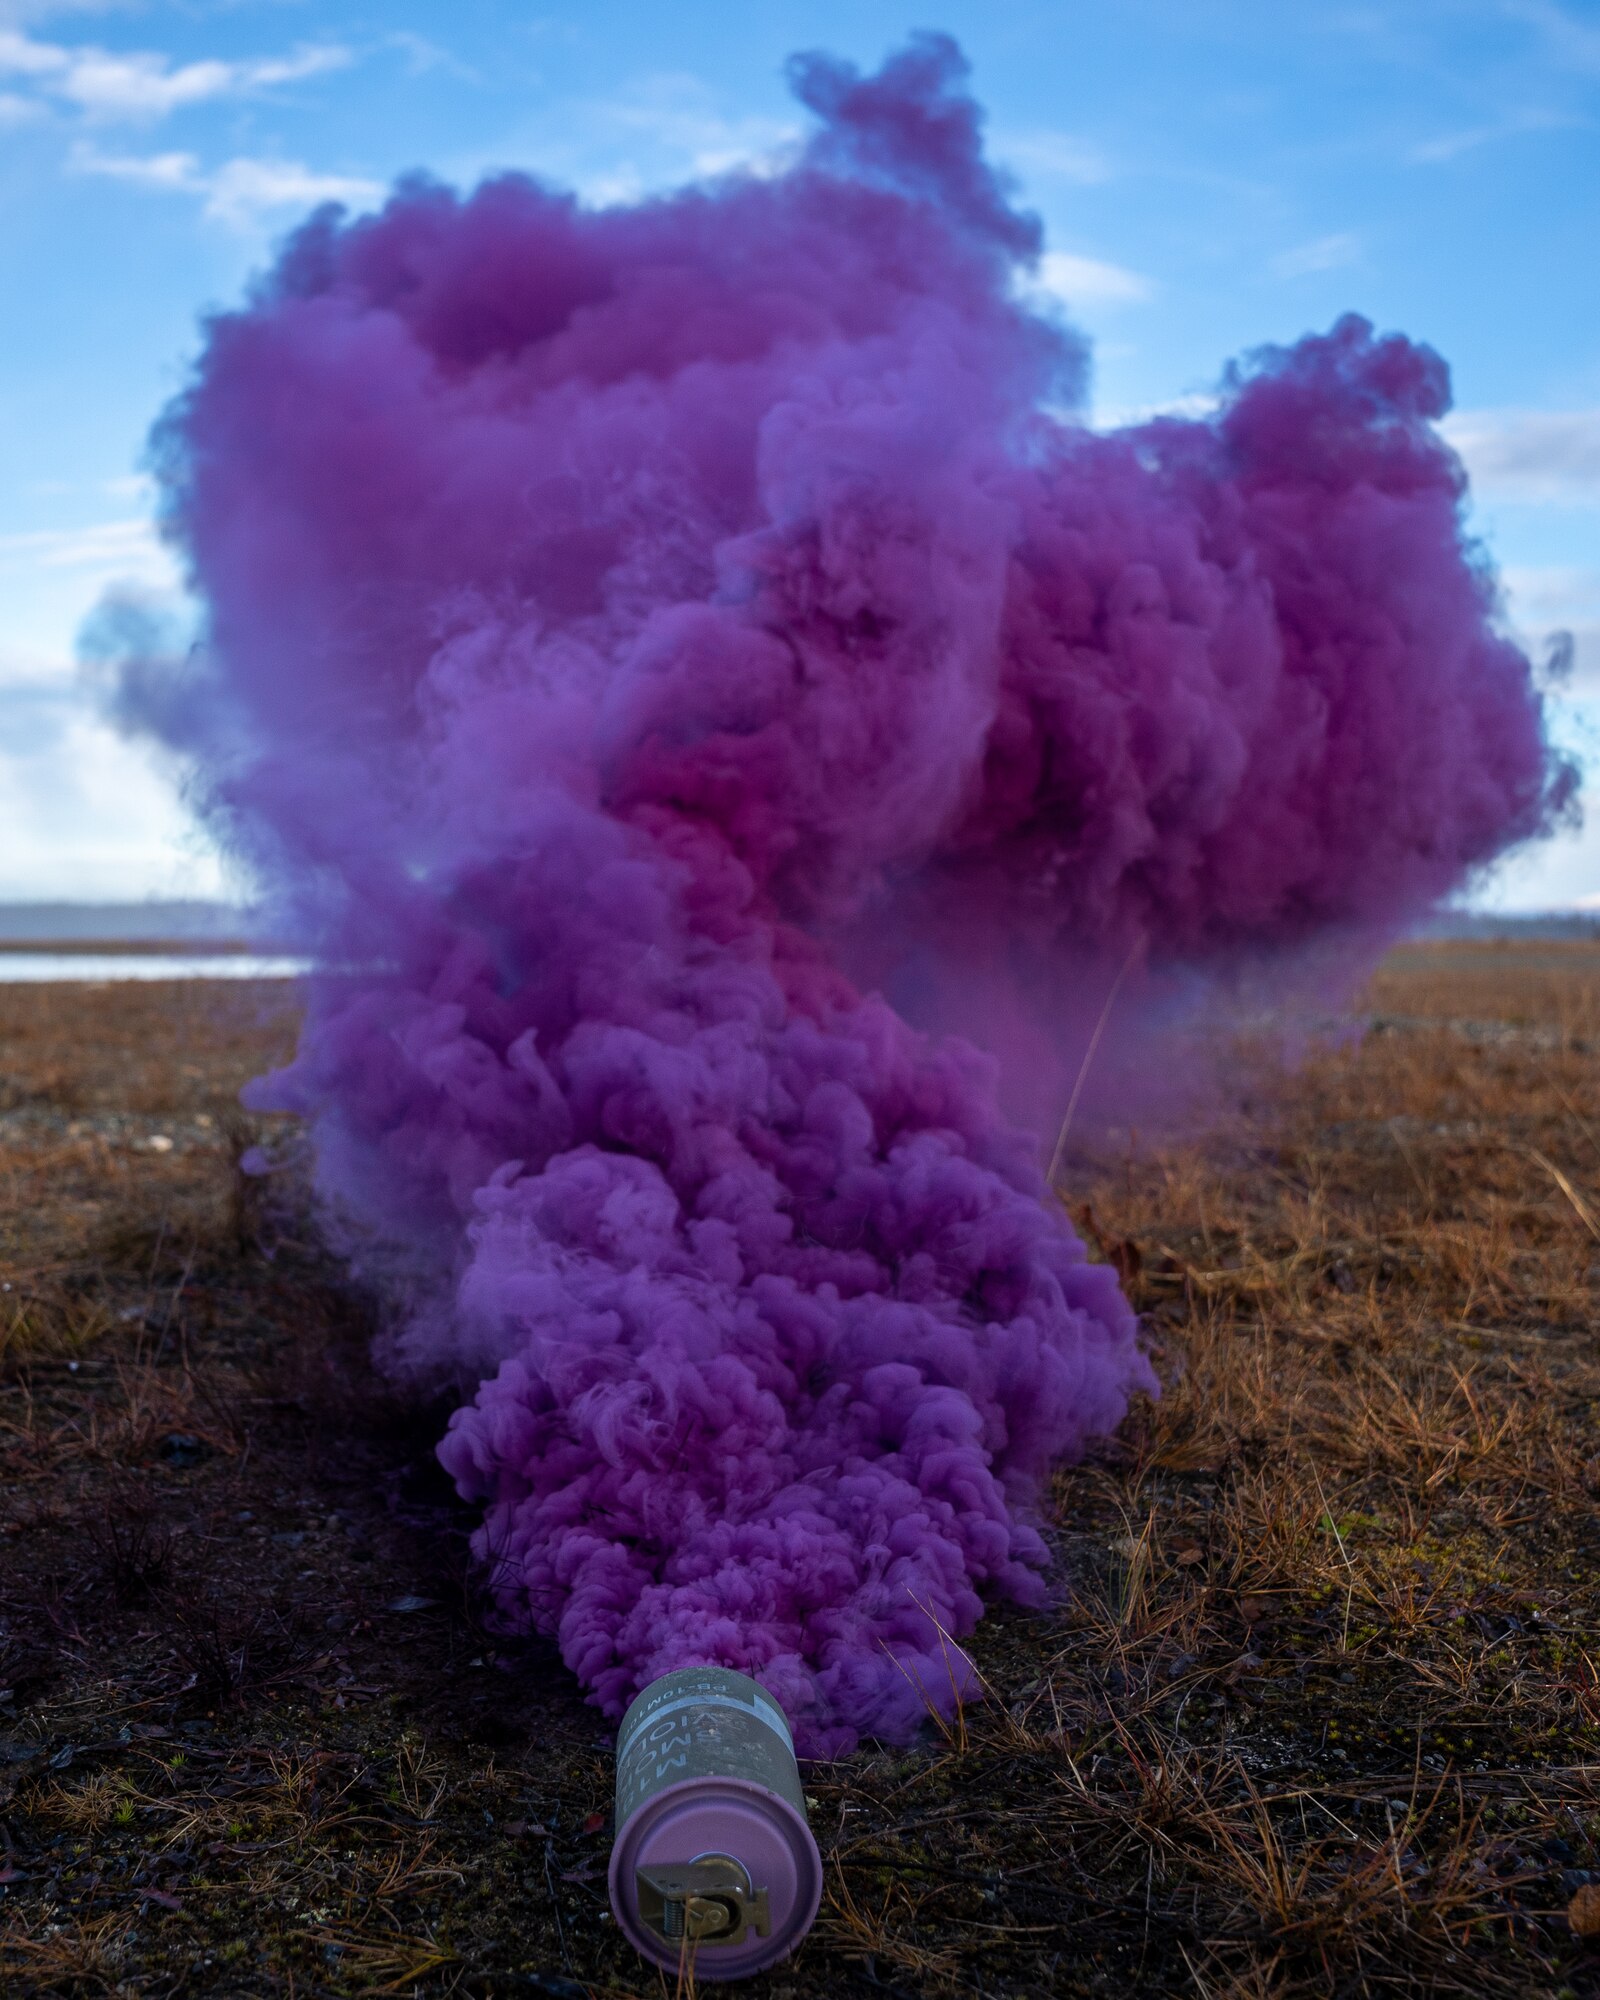 An M18 smoke grenade is used as a landing spot for pararescuemen during a training event at Joint Base Elmendorf-Richardson.